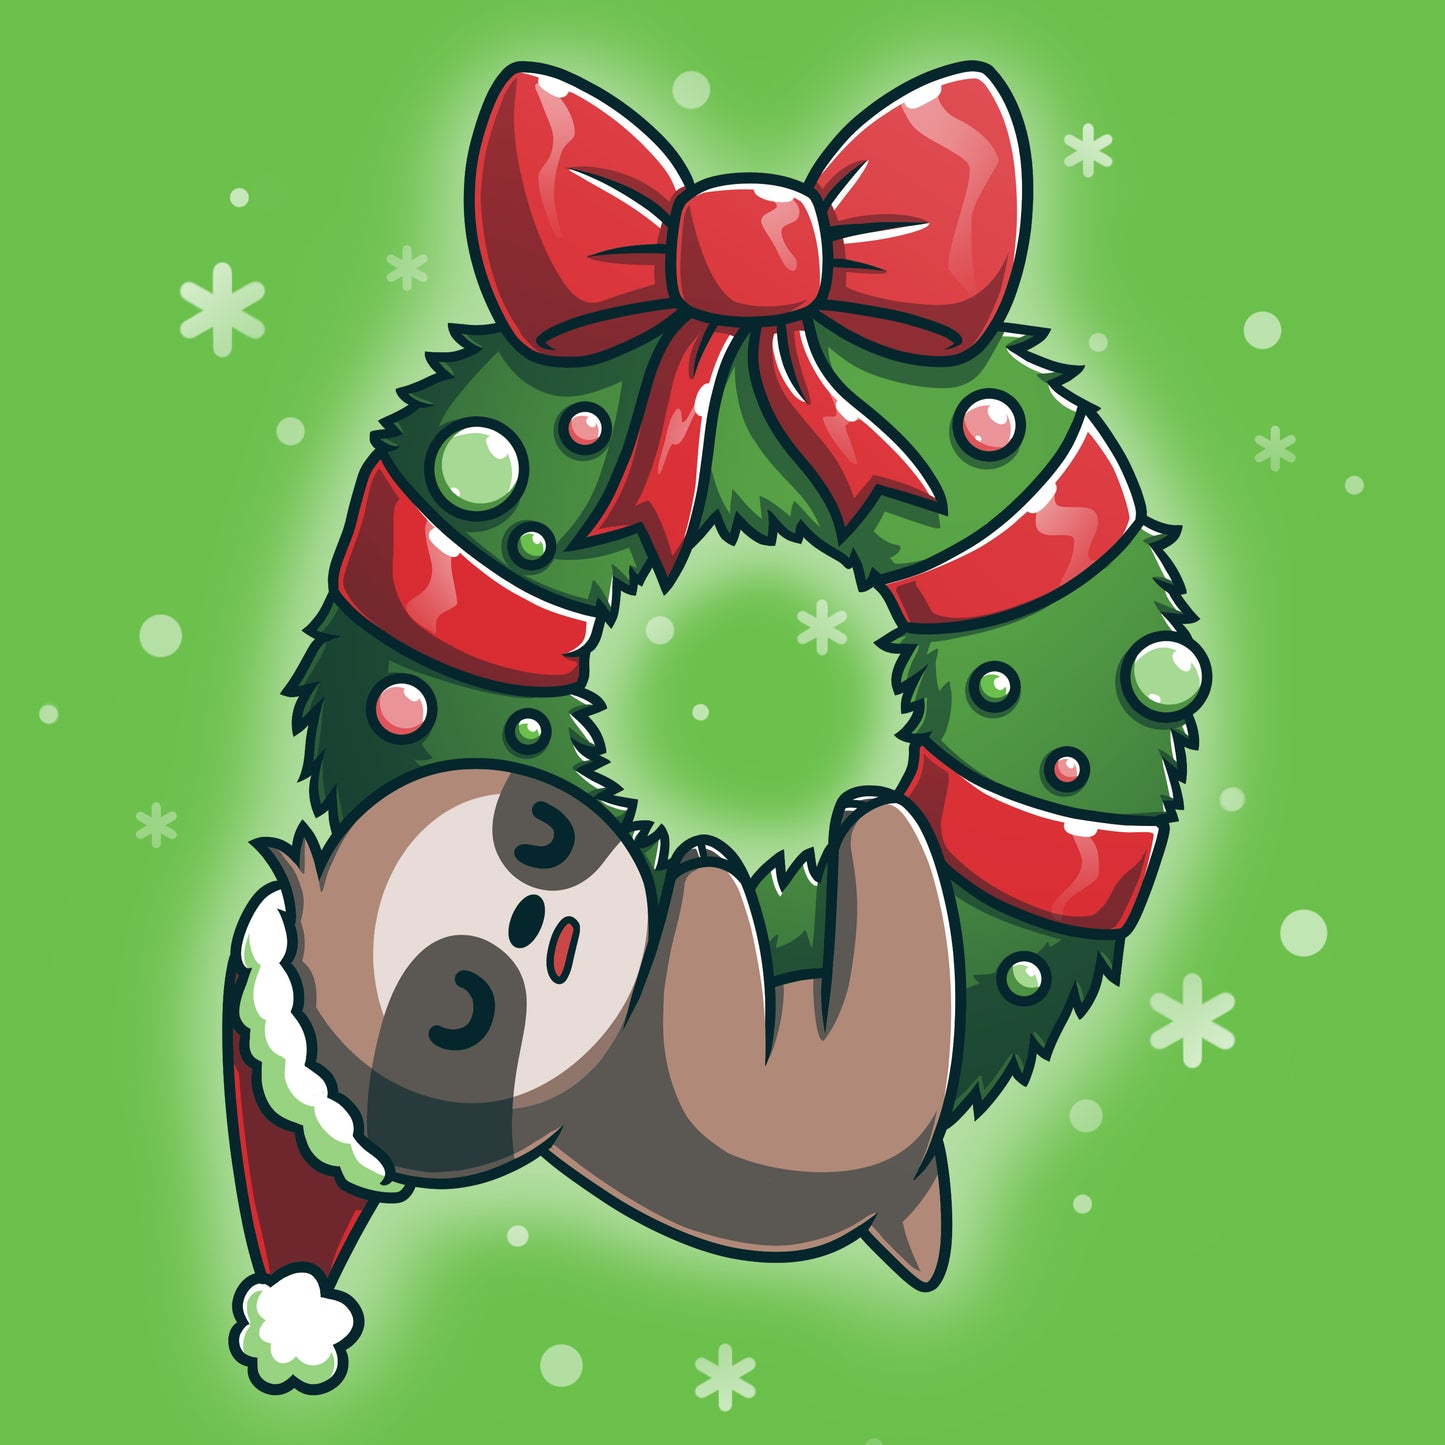 A sloth wearing a TeeTurtle santa hat on a We Wish You a Lazy Christmas themed T-shirt against a green background.